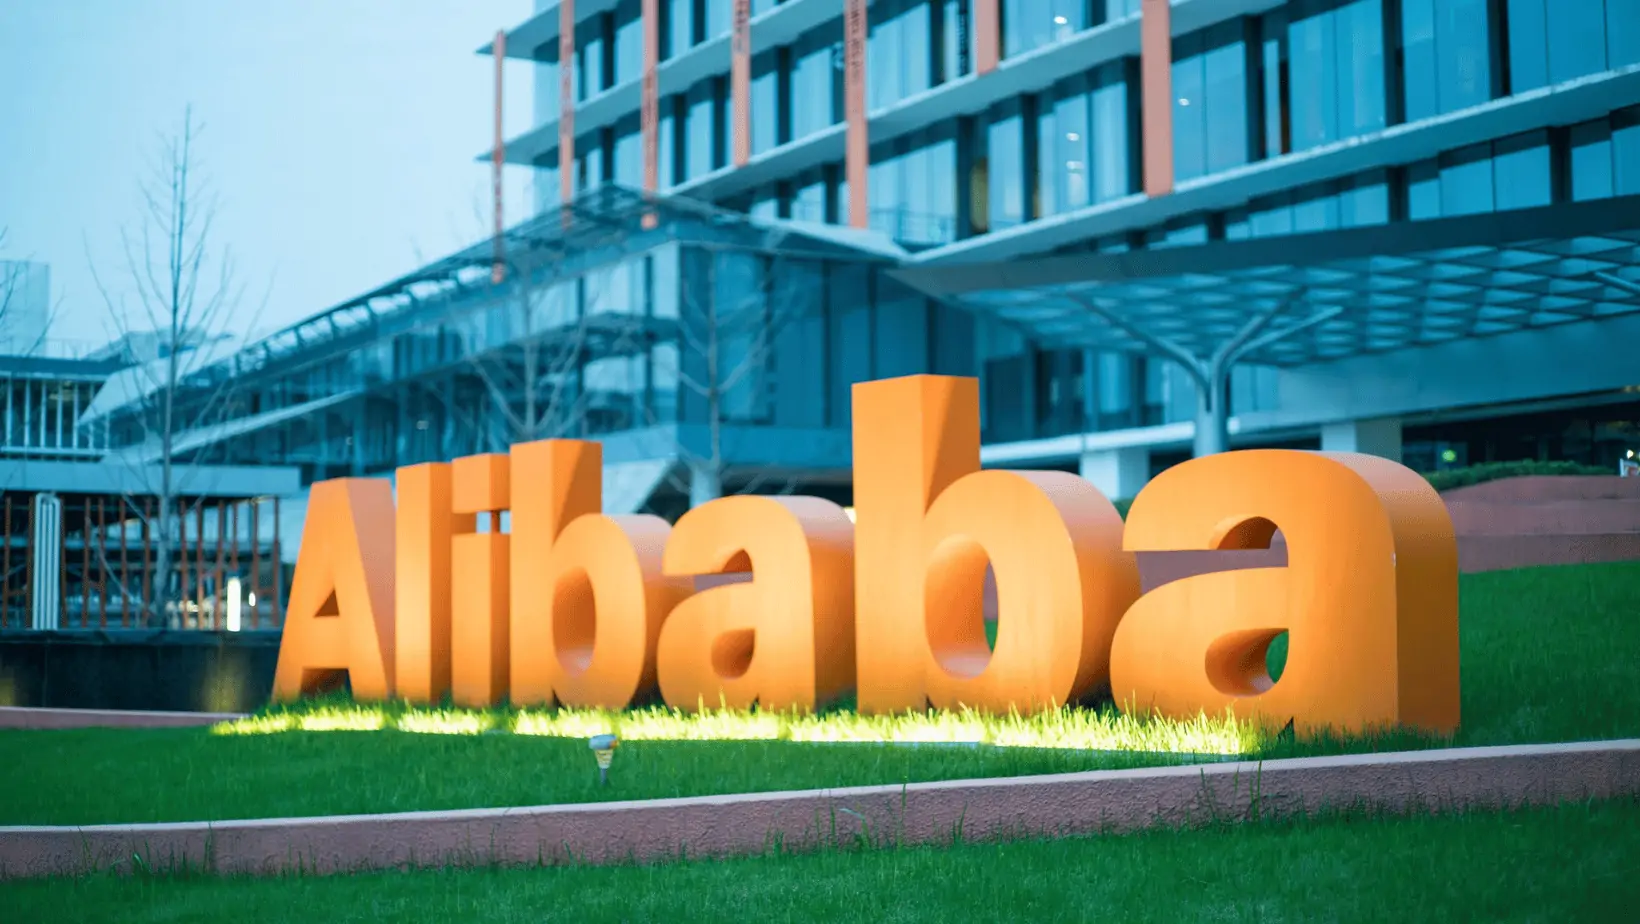 Alibaba Shifts Focus Away from “New Retail” Strategy Amidst Growing Competition